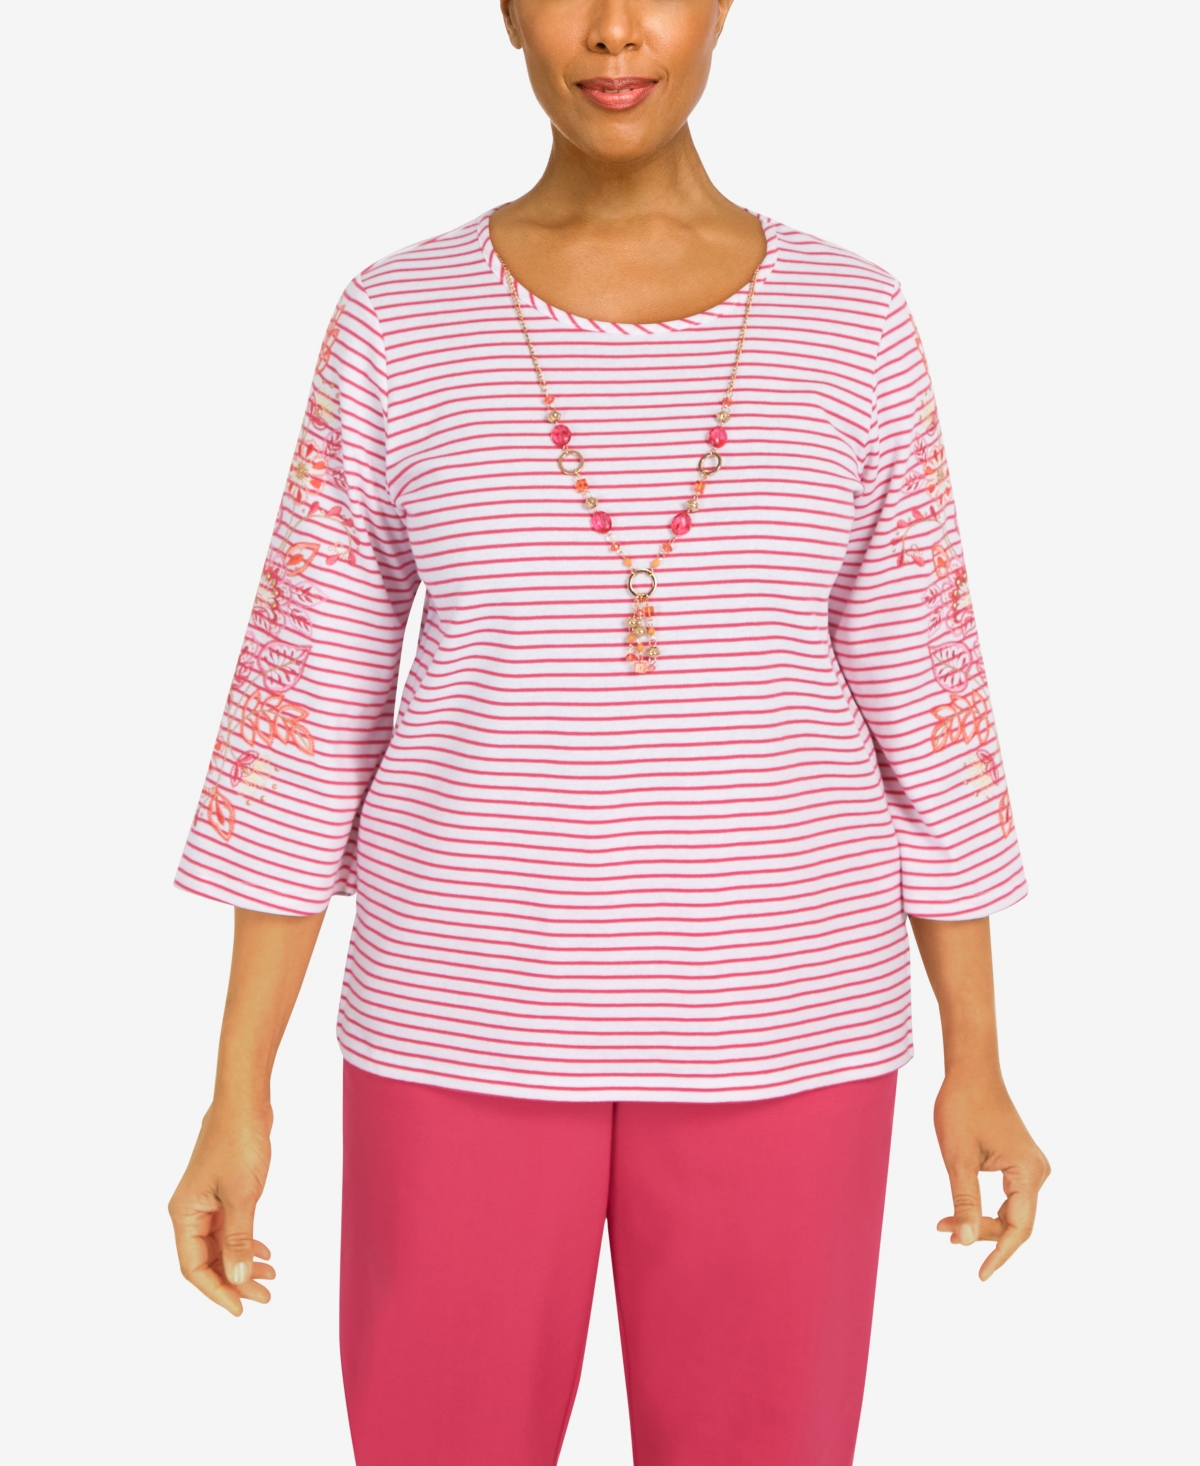 Alfred Dunner Women's Hot Stripe Embroidered Sleeve Top with Necklace